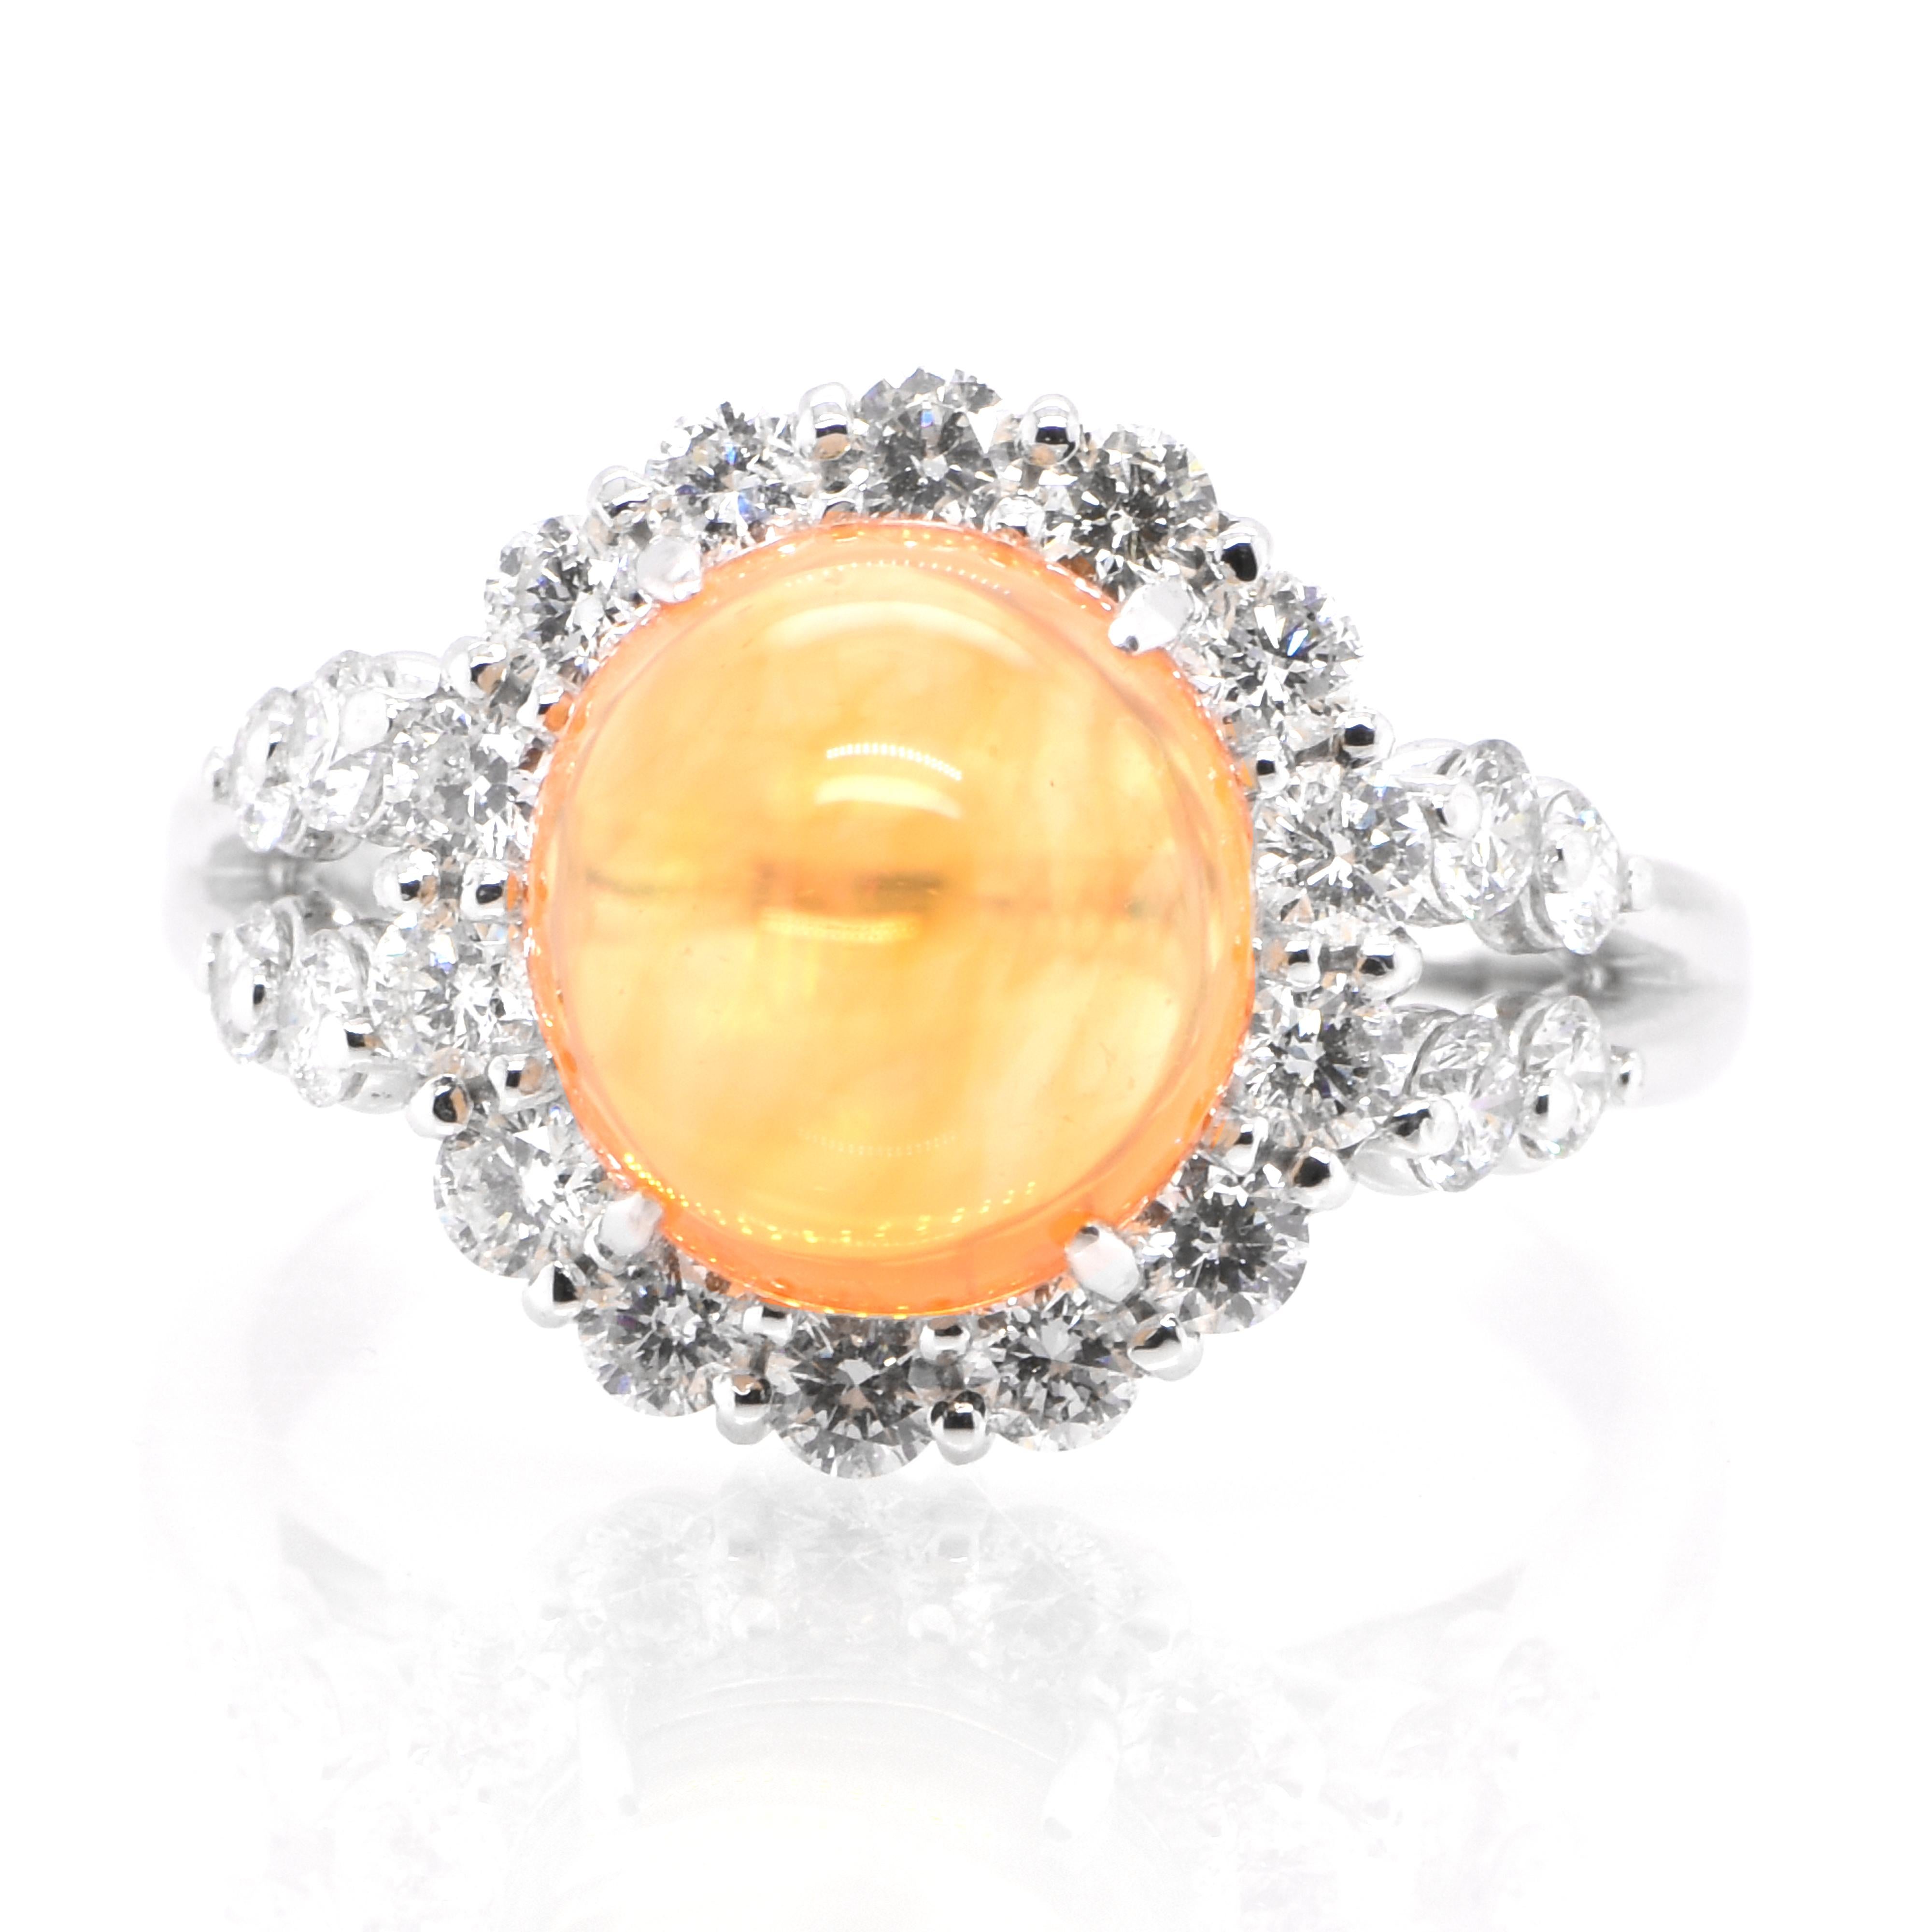 A beautiful ring featuring a 2.74 Carat Natural Mexican Fire Opal and 0.85 Carats of Diamond Accents set in Platinum. Opals are known for exhibiting flashes of rainbow colors known as 